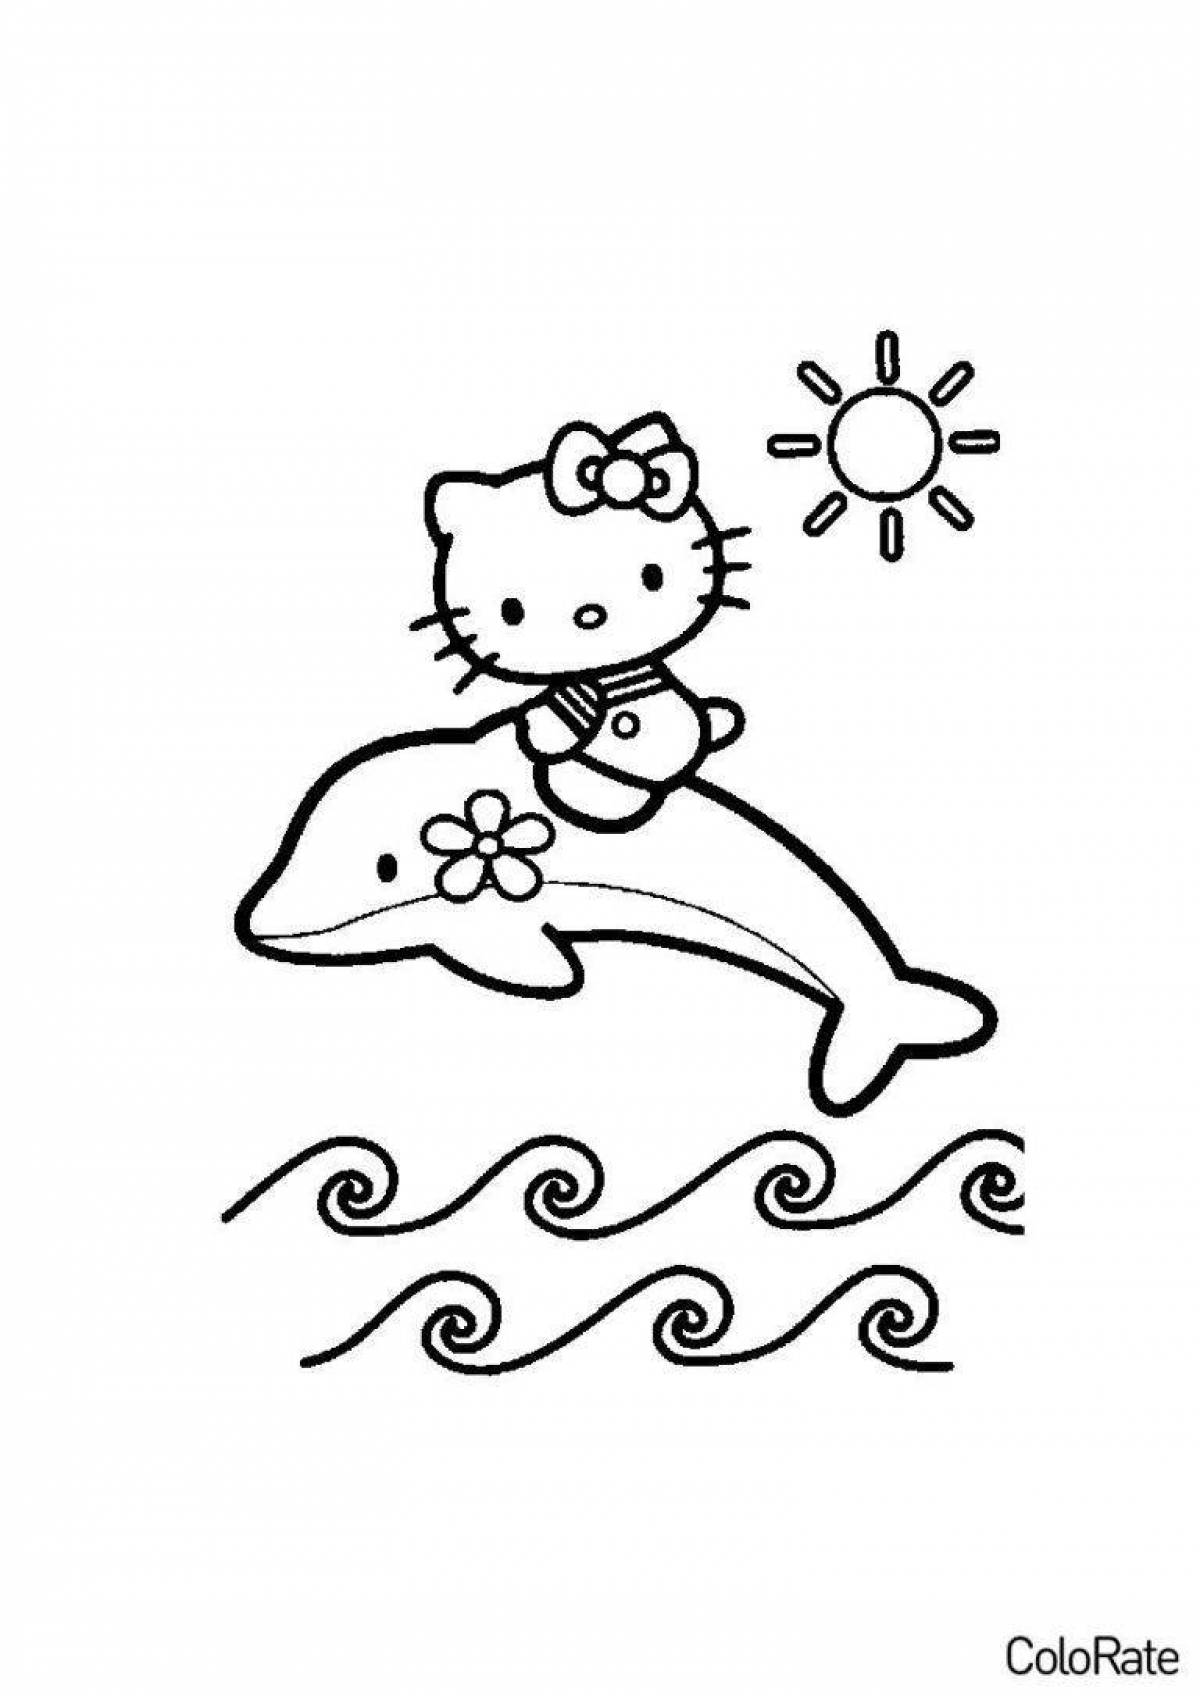 Glorious hello kitty mermaid coloring page